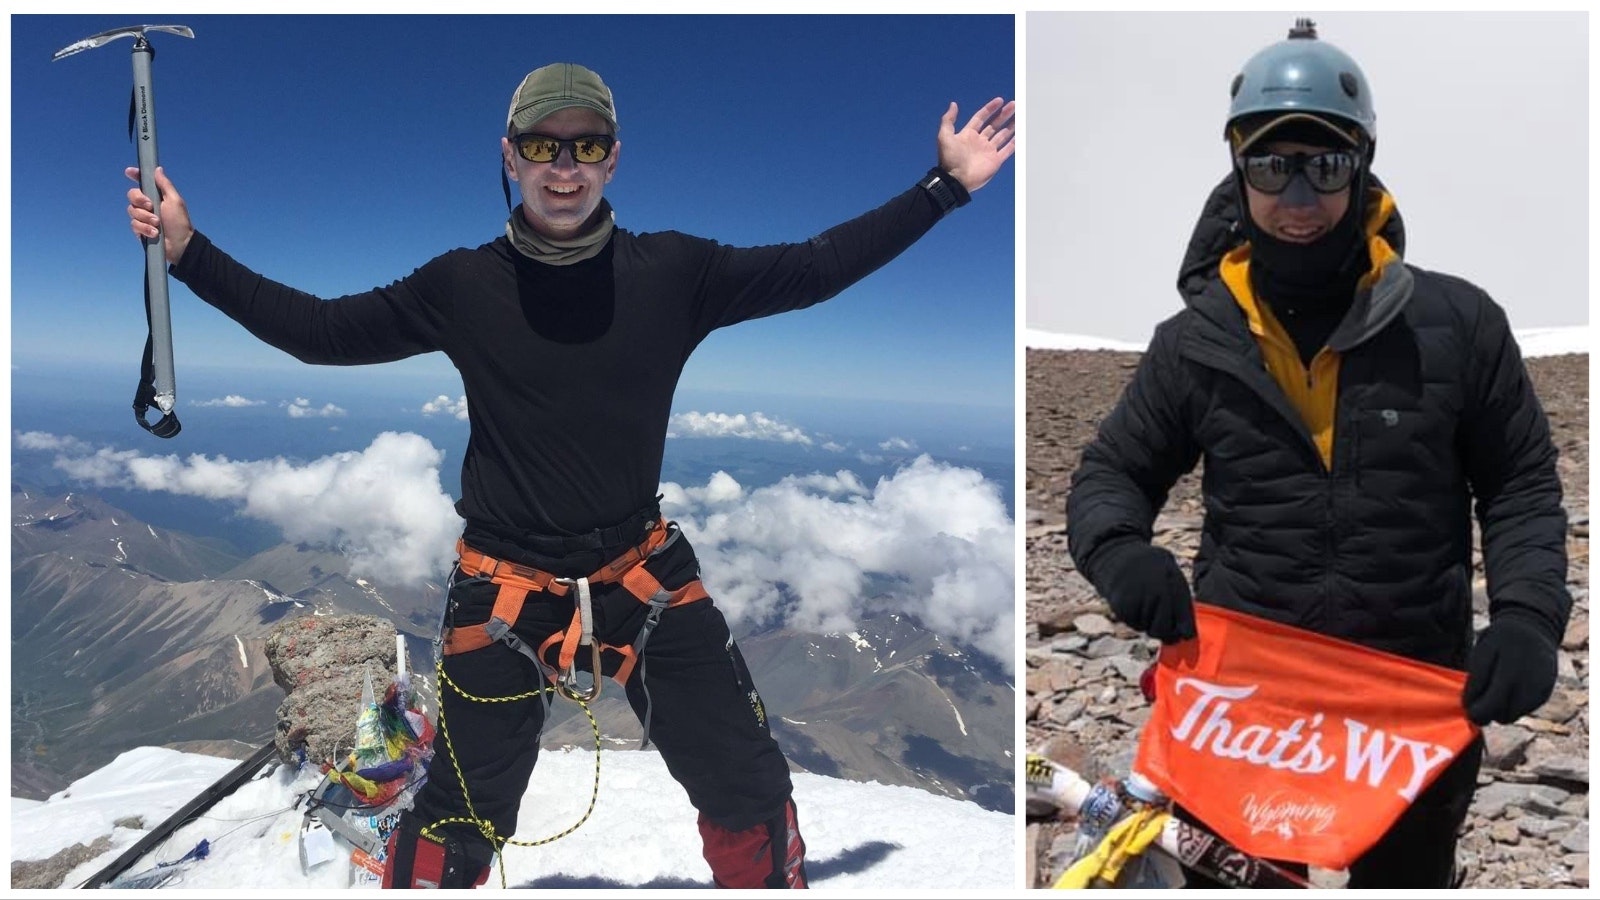 Wyoming mountaineer Dr. Joe McGinley of Casper is on a mission to summit the highest peaks on all seven continents. He came close to checking Mount Everest off the list recently, but had to call off the attempt because of crowding and a mounting death toll.